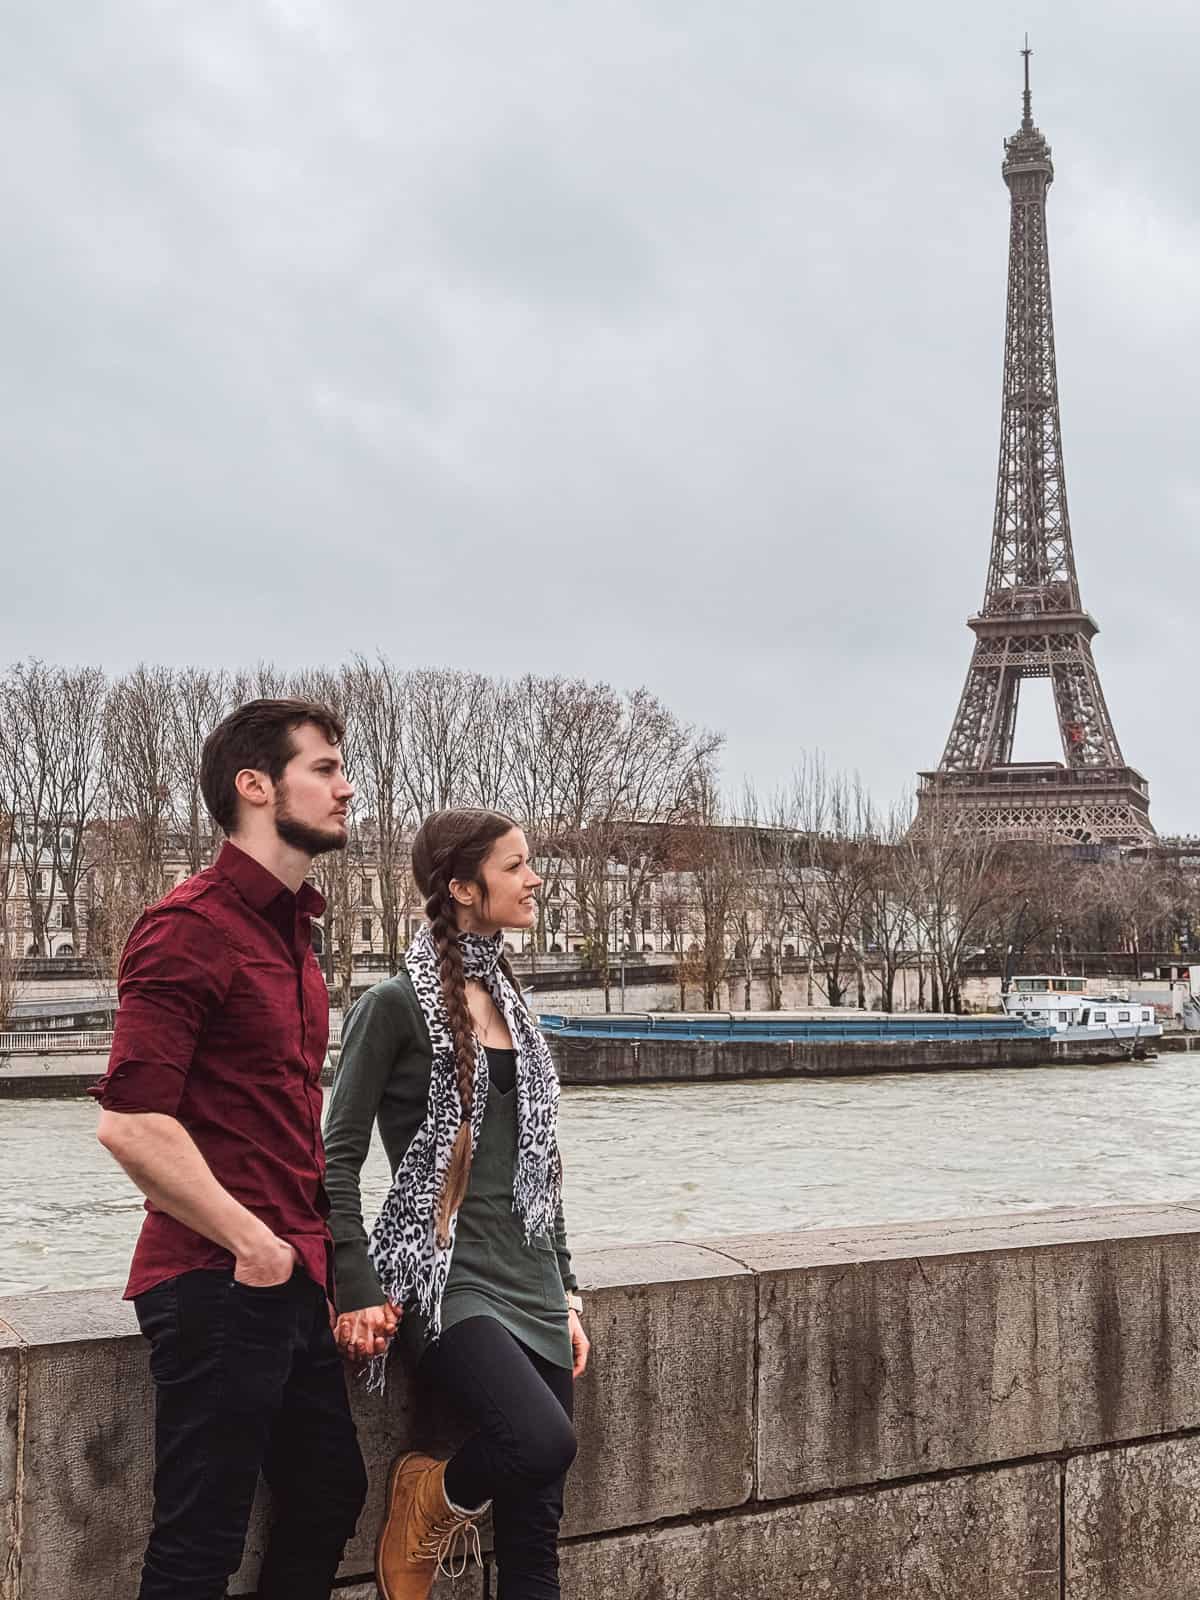 A man and woman, clad in casual attire, hold hands while looking out over the Seine River with the Eiffel Tower in the distant Paris skyline.